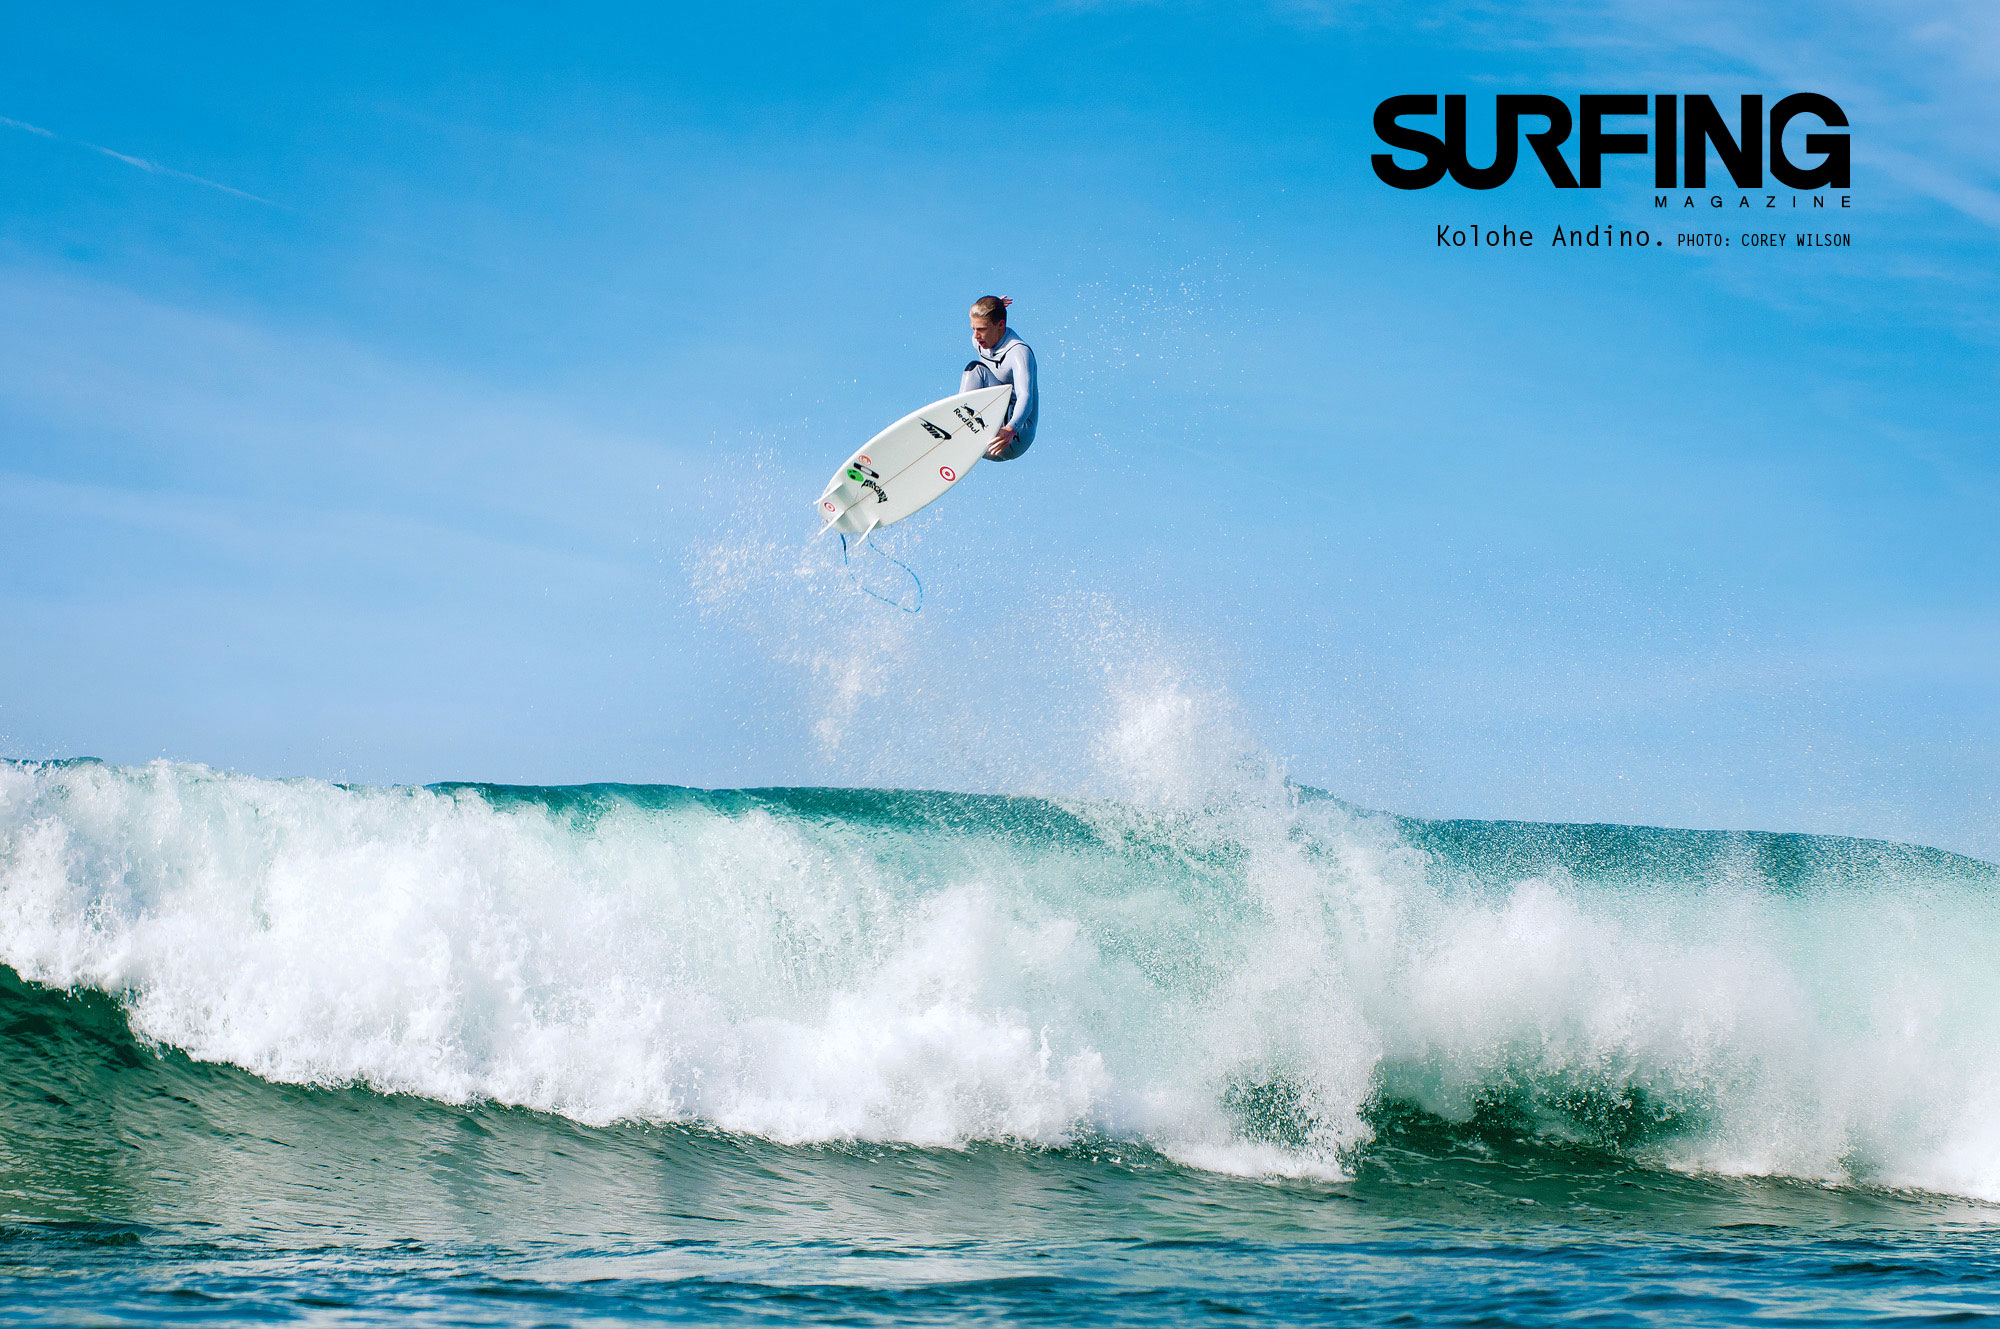 May 2012 Issue Wallpaper | SURFING Magazine